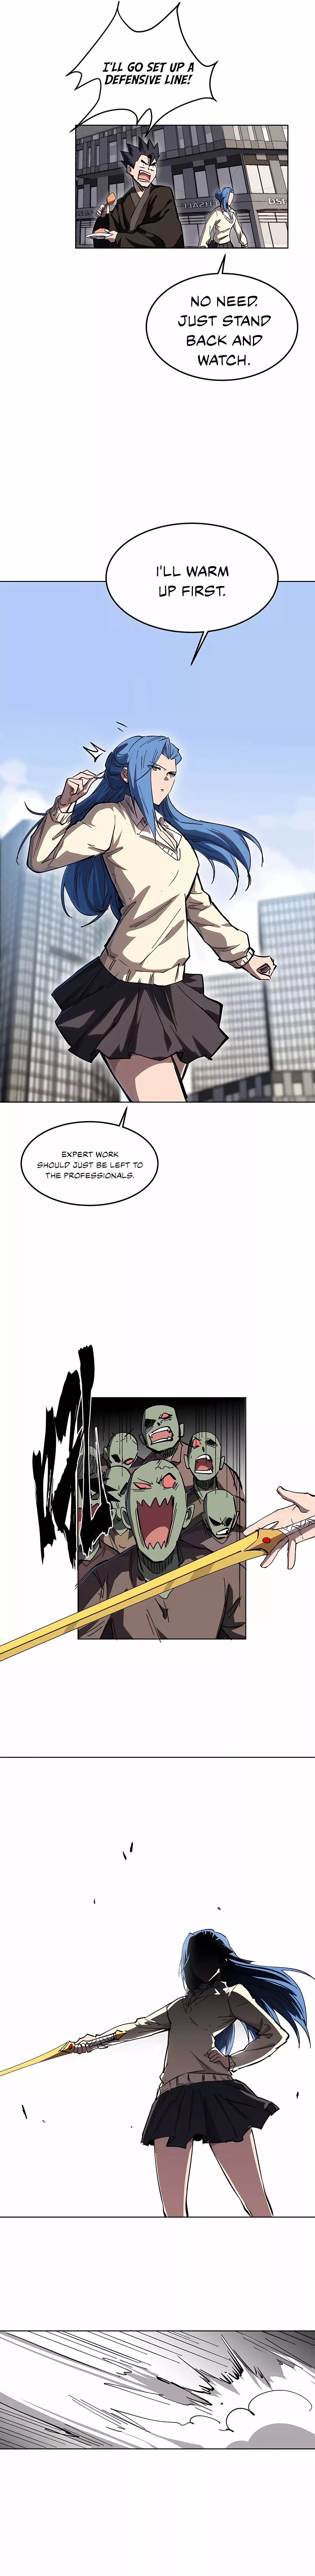 Mr. Zombie - Page 3